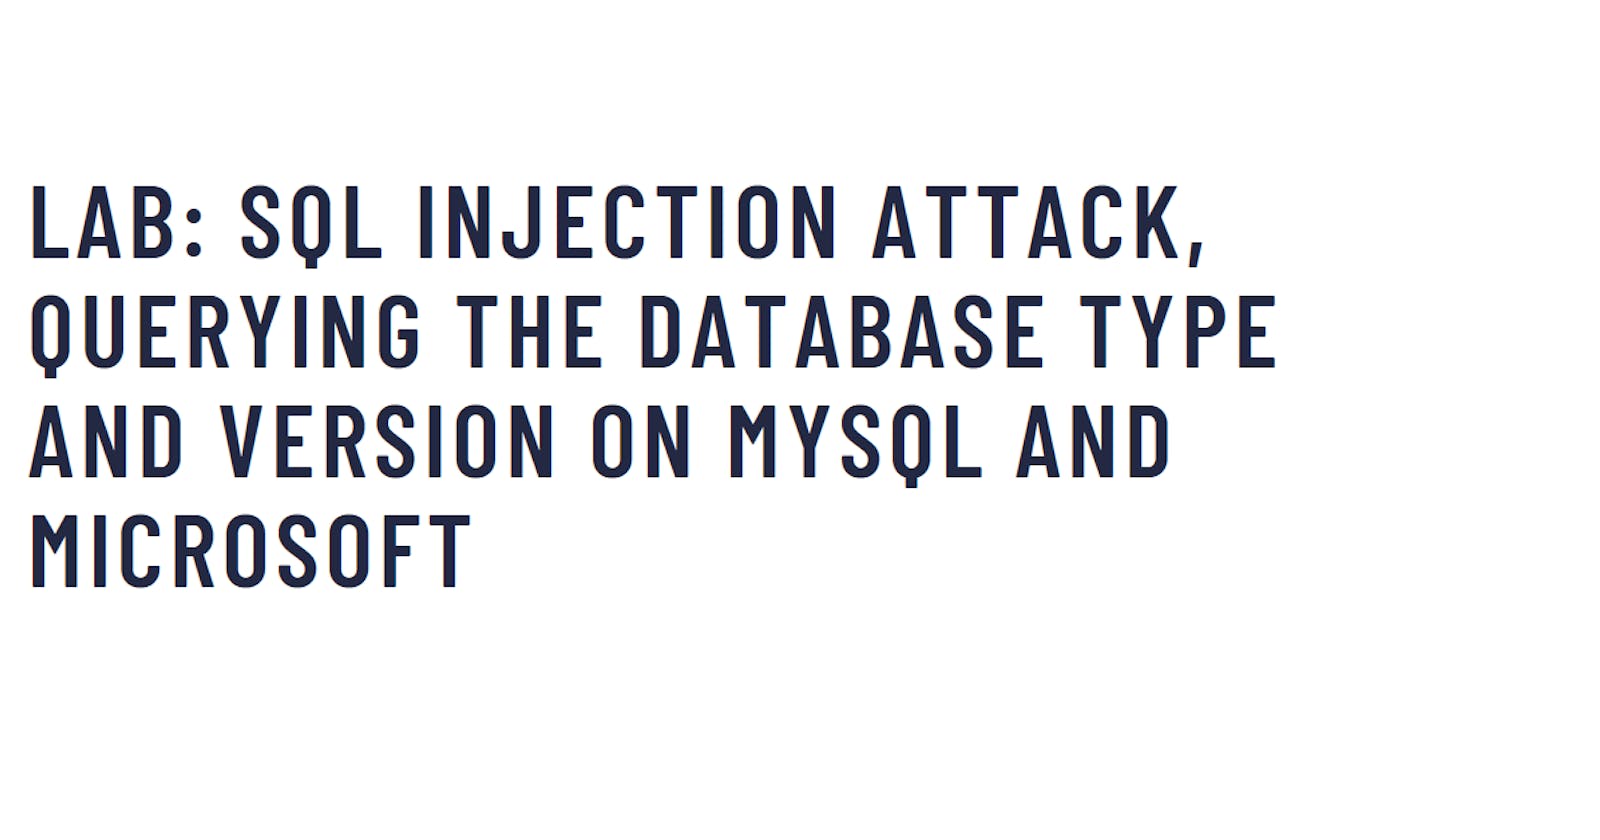 Lab: SQL injection attack, querying the database type and version on MySQL and Microsoft